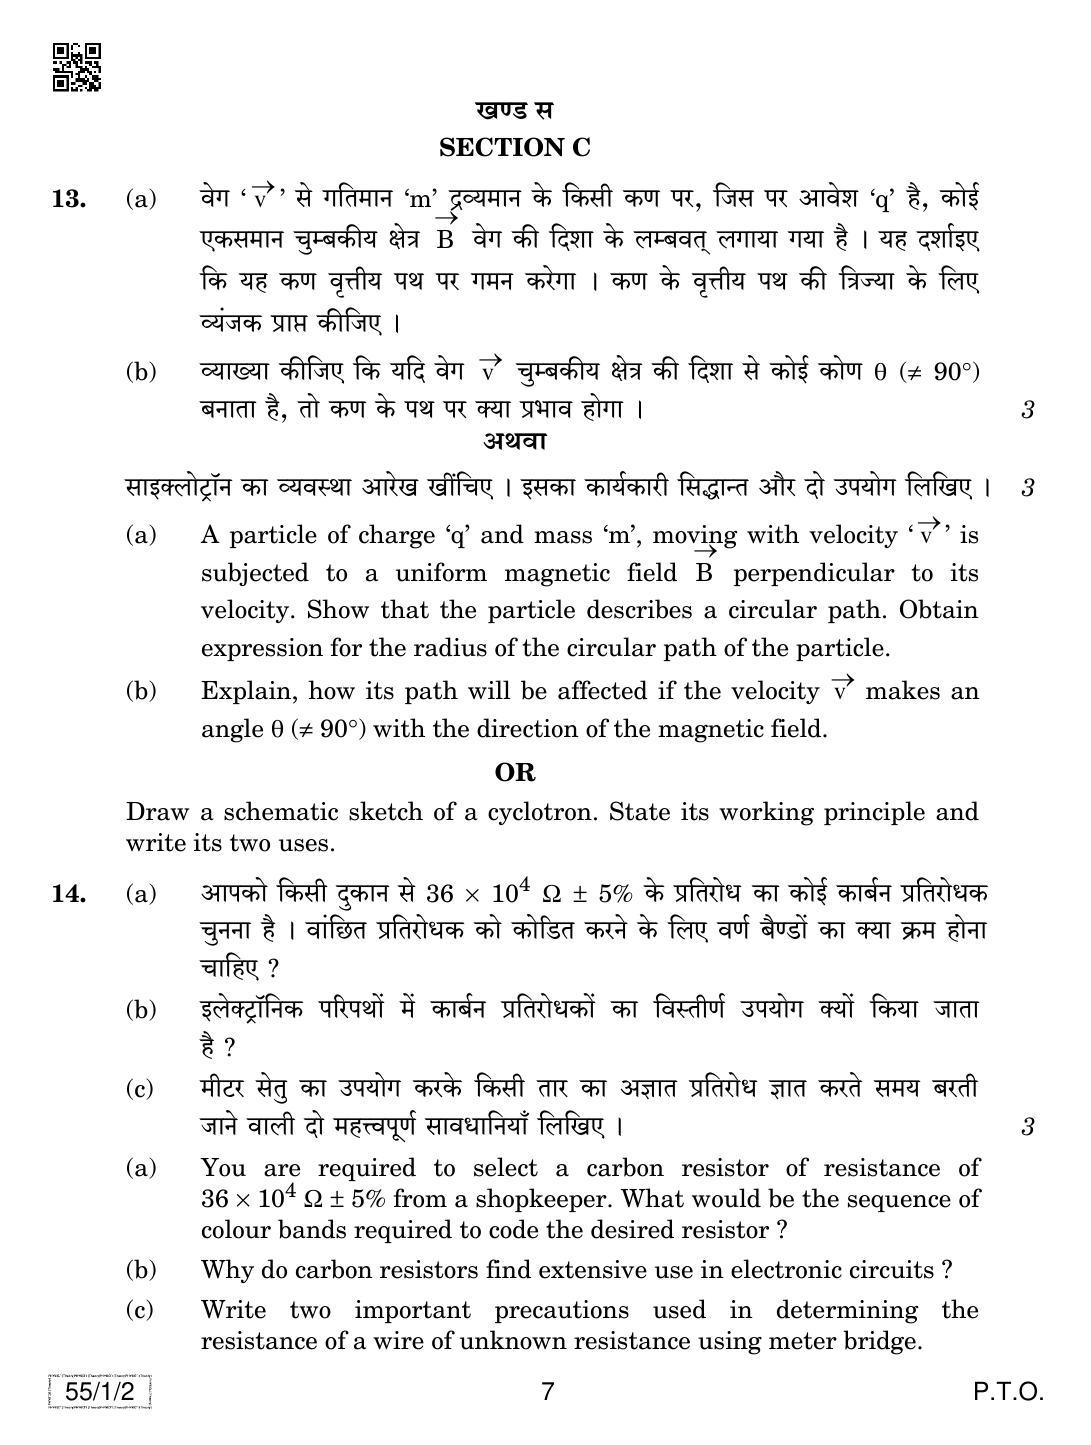 CBSE Class 12 55-1-2 PHYSICS 2019 Compartment Question Paper - Page 7